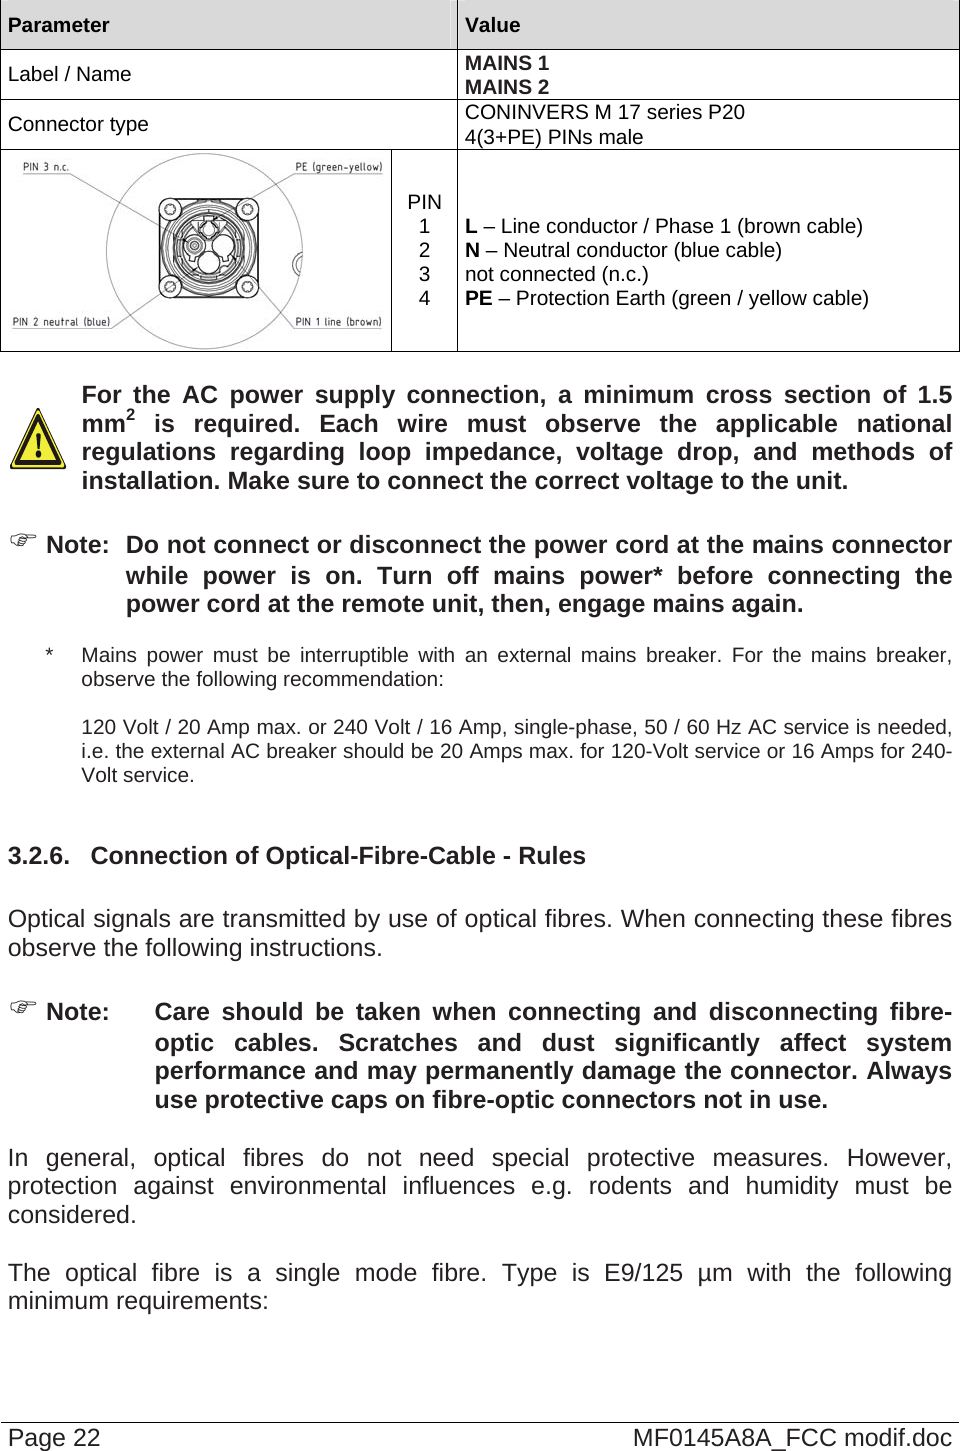   Parameter  Value Label / Name  MAINS 1 MAINS 2 Connector type  CONINVERS M 17 series P20 4(3+PE) PINs male PIN 1 2 3 4  L – Line conductor / Phase 1 (brown cable) N – Neutral conductor (blue cable) not connected (n.c.) PE – Protection Earth (green / yellow cable)    For the AC power supply connection, a minimum cross section of 1.5 mm2 is required. Each wire must observe the applicable national regulations regarding loop impedance, voltage drop, and methods of installation. Make sure to connect the correct voltage to the unit.   Note:  Do not connect or disconnect the power cord at the mains connector while power is on. Turn off mains power* before connecting the power cord at the remote unit, then, engage mains again. *   Mains power must be interruptible with an external mains breaker. For the mains breaker, observe the following recommendation:  120 Volt / 20 Amp max. or 240 Volt / 16 Amp, single-phase, 50 / 60 Hz AC service is needed, i.e. the external AC breaker should be 20 Amps max. for 120-Volt service or 16 Amps for 240-Volt service.  3.2.6.  Connection of Optical-Fibre-Cable - Rules  Optical signals are transmitted by use of optical fibres. When connecting these fibres observe the following instructions.    Note:  Care should be taken when connecting and disconnecting fibre-optic cables. Scratches and dust significantly affect system performance and may permanently damage the connector. Always use protective caps on fibre-optic connectors not in use.  In general, optical fibres do not need special protective measures. However, protection against environmental influences e.g. rodents and humidity must be considered.  The optical fibre is a single mode fibre. Type is E9/125 µm with the following minimum requirements: Page 22  MF0145A8A_FCC modif.doc 